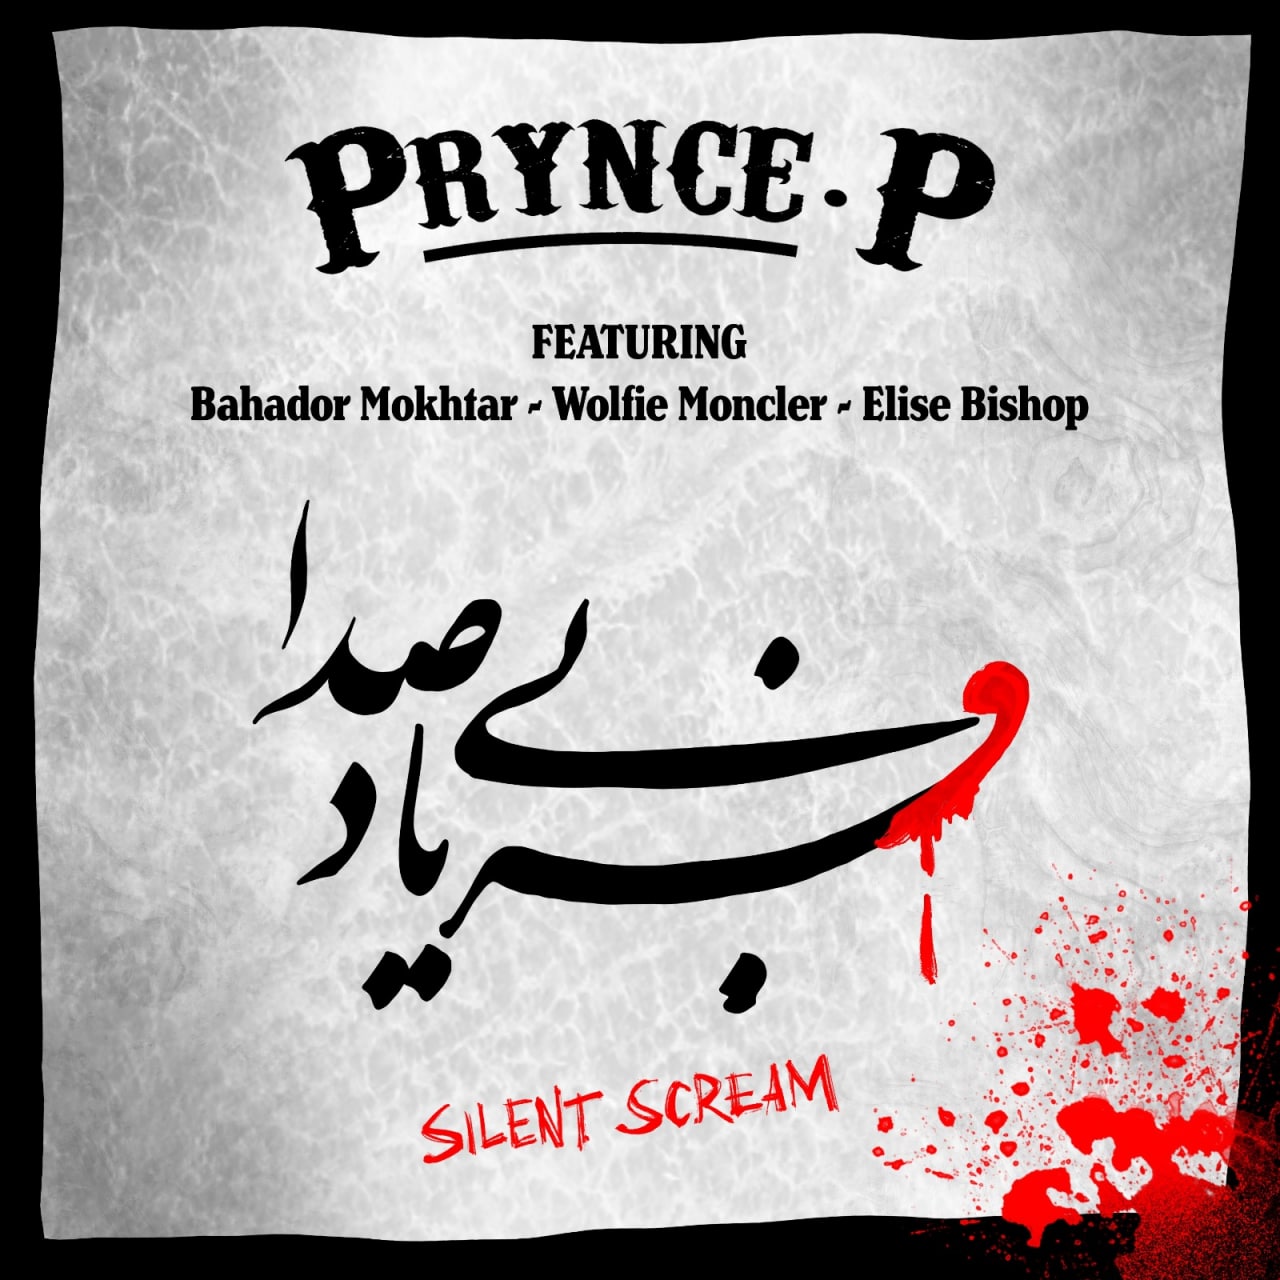 Dedicated to unite humanity and to shed light on the importance of world peace, ‘Prynce P’ drops ‘Silent Scream’ with Bahador Mokhtar, Wolfie Moncler & Elise Bishop.